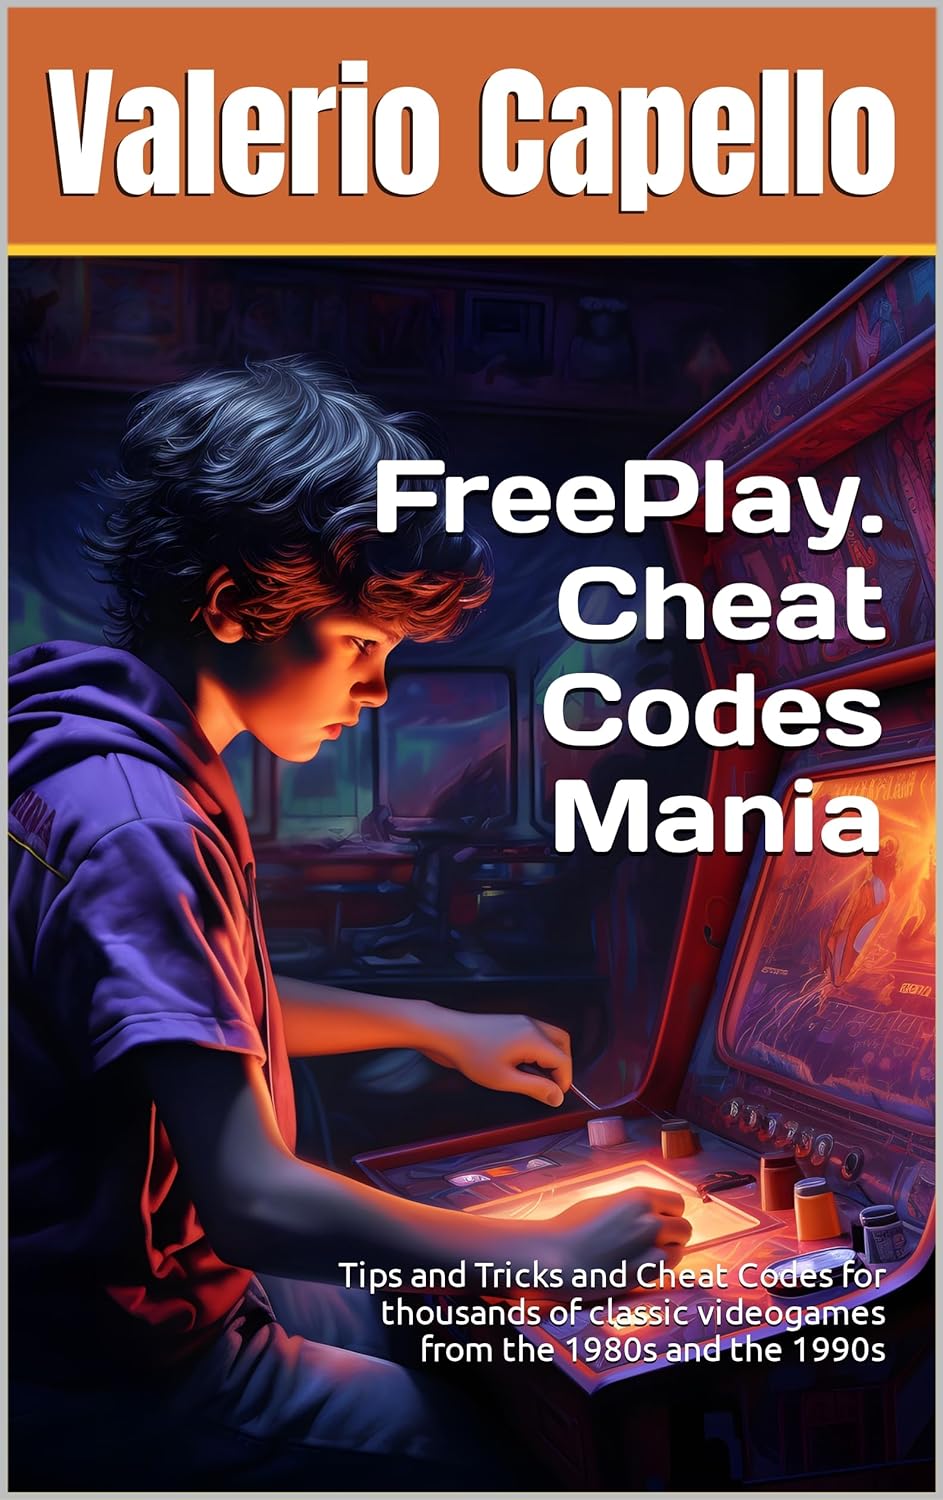 FreePlay. Cheat Codes Mania: Tips and Tricks and Cheat Codes for thousands of classic videogames from the 1980s and the 1990s